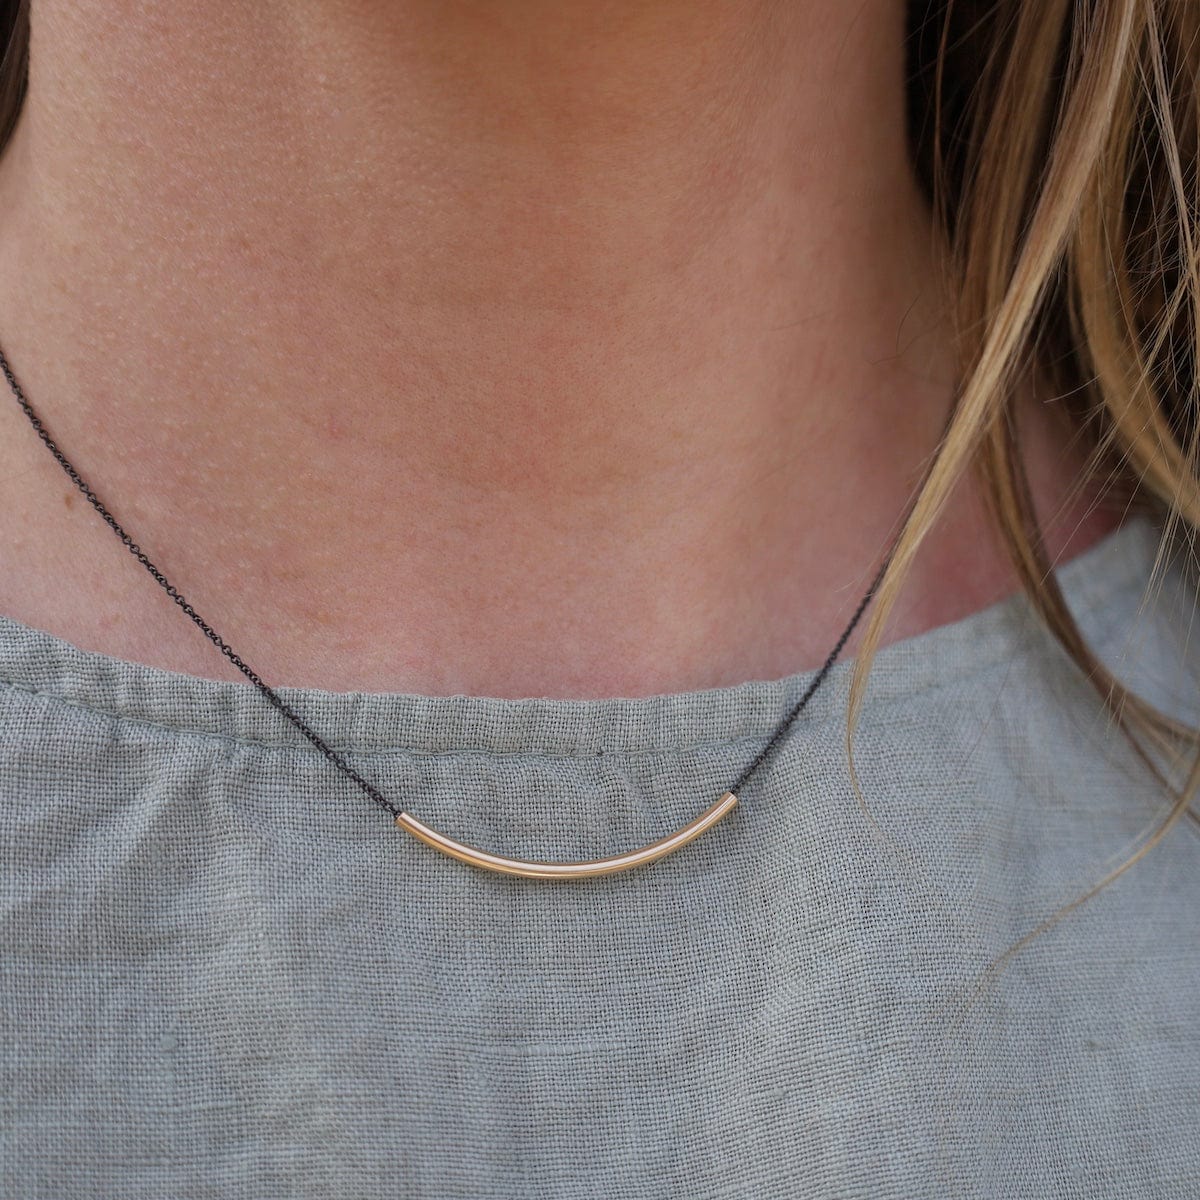 NKL Oxidized Sterling Silver & Gold Filled Smooth as Silk Necklace